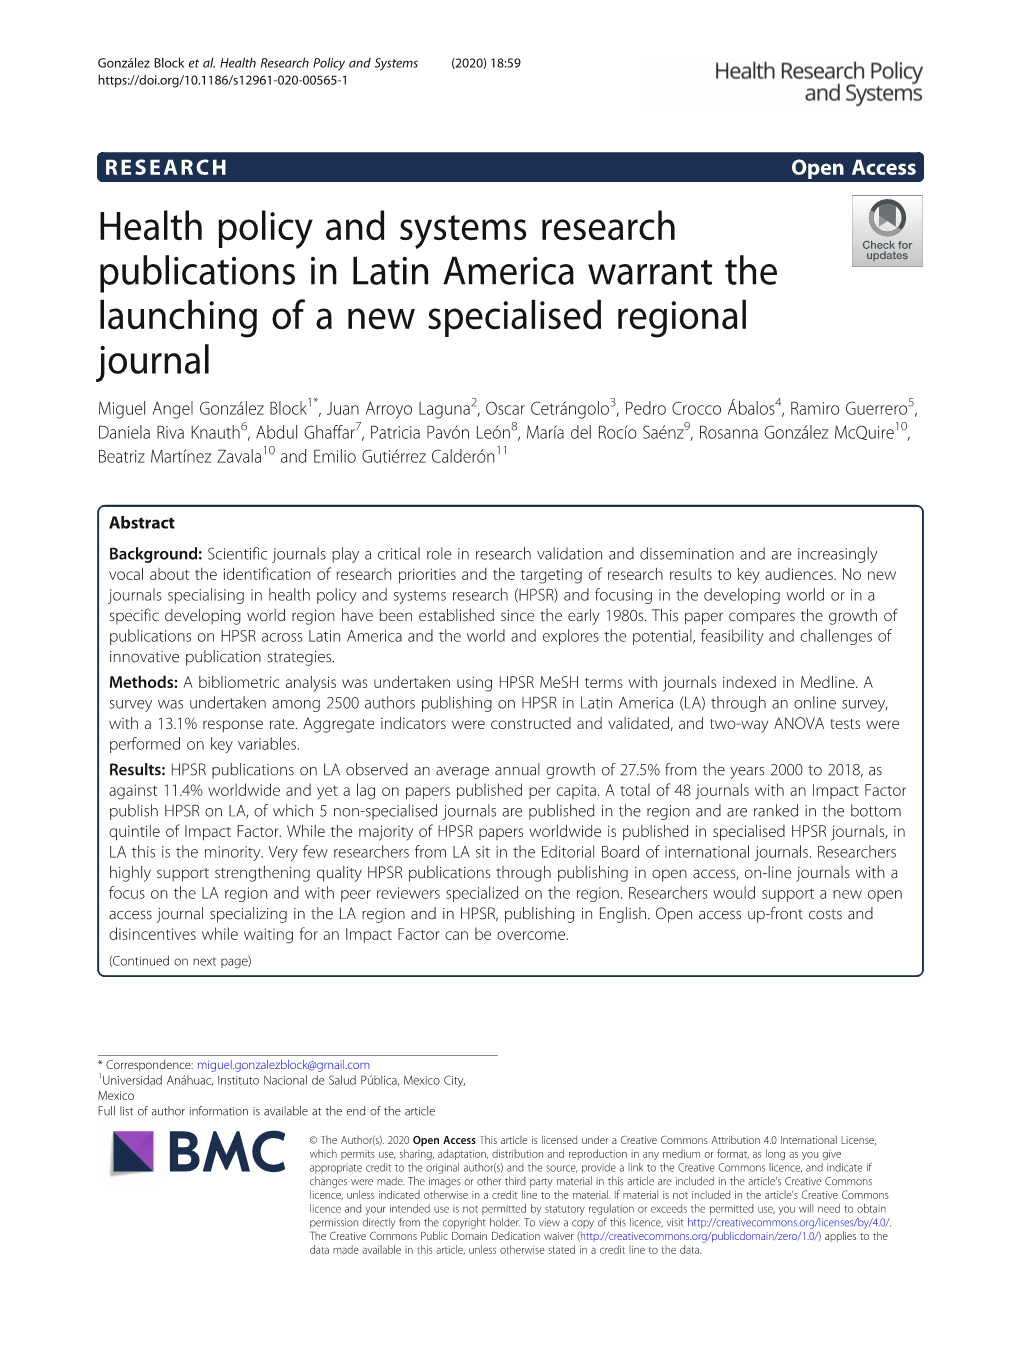 Health Policy and Systems Research Publications in Latin America Warrant the Launching of a New Specialised Regional Journal